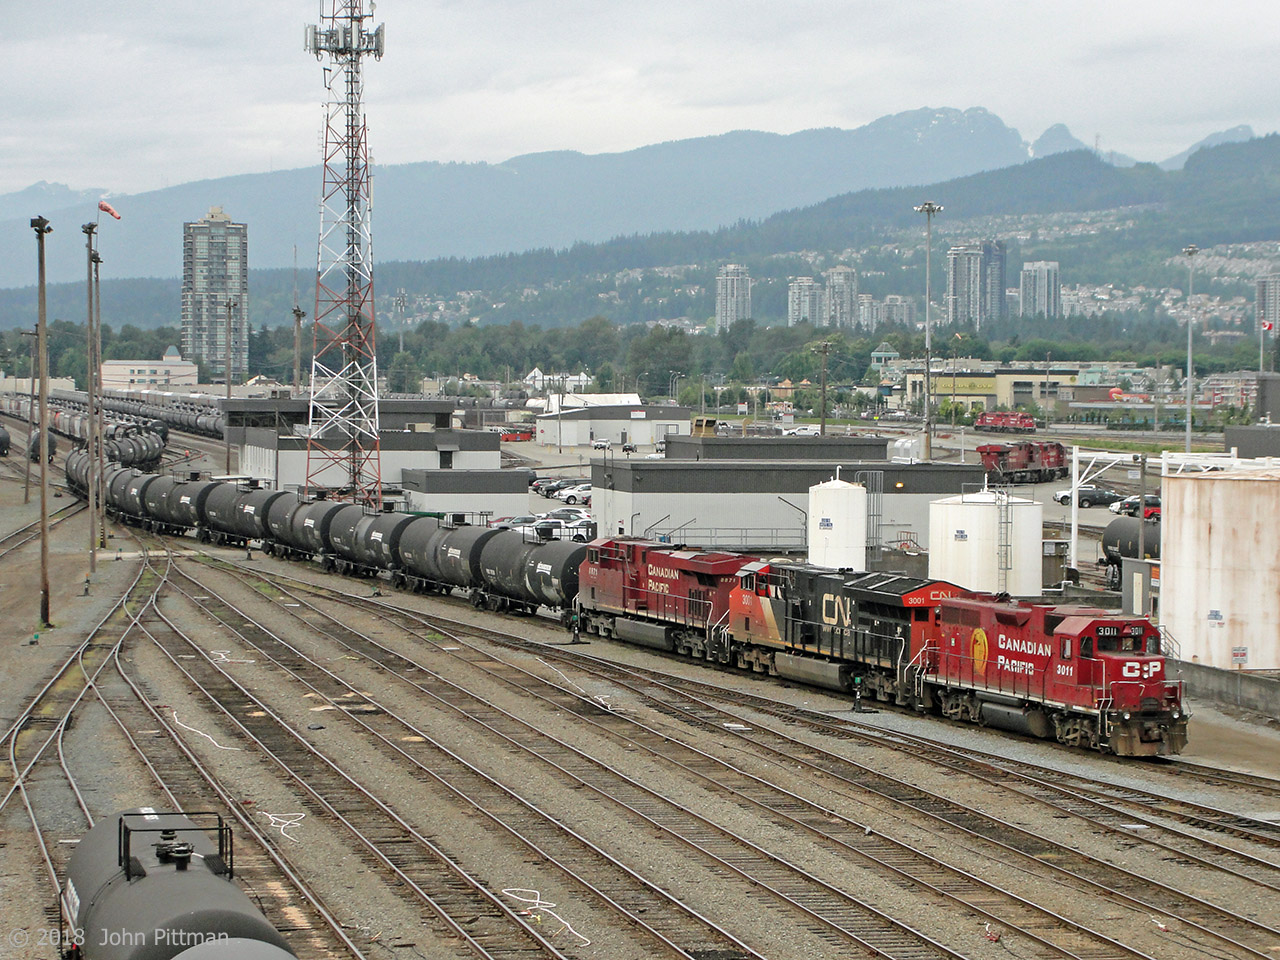 Yard switcher CP 3011 (GP38AC built 1971) gets serious extra muscle from CN 3001 (ET44ac built 2015) and CP 8871 (ES44ac built 2008) as they switch tank cars in Port Coquitlam yard. Viewpoint is the Coast Meridian Overpass (bridge).
Highrise buildings in the background are in Port Coquitlam, while the residential area further up the hill is in Coquitlam.